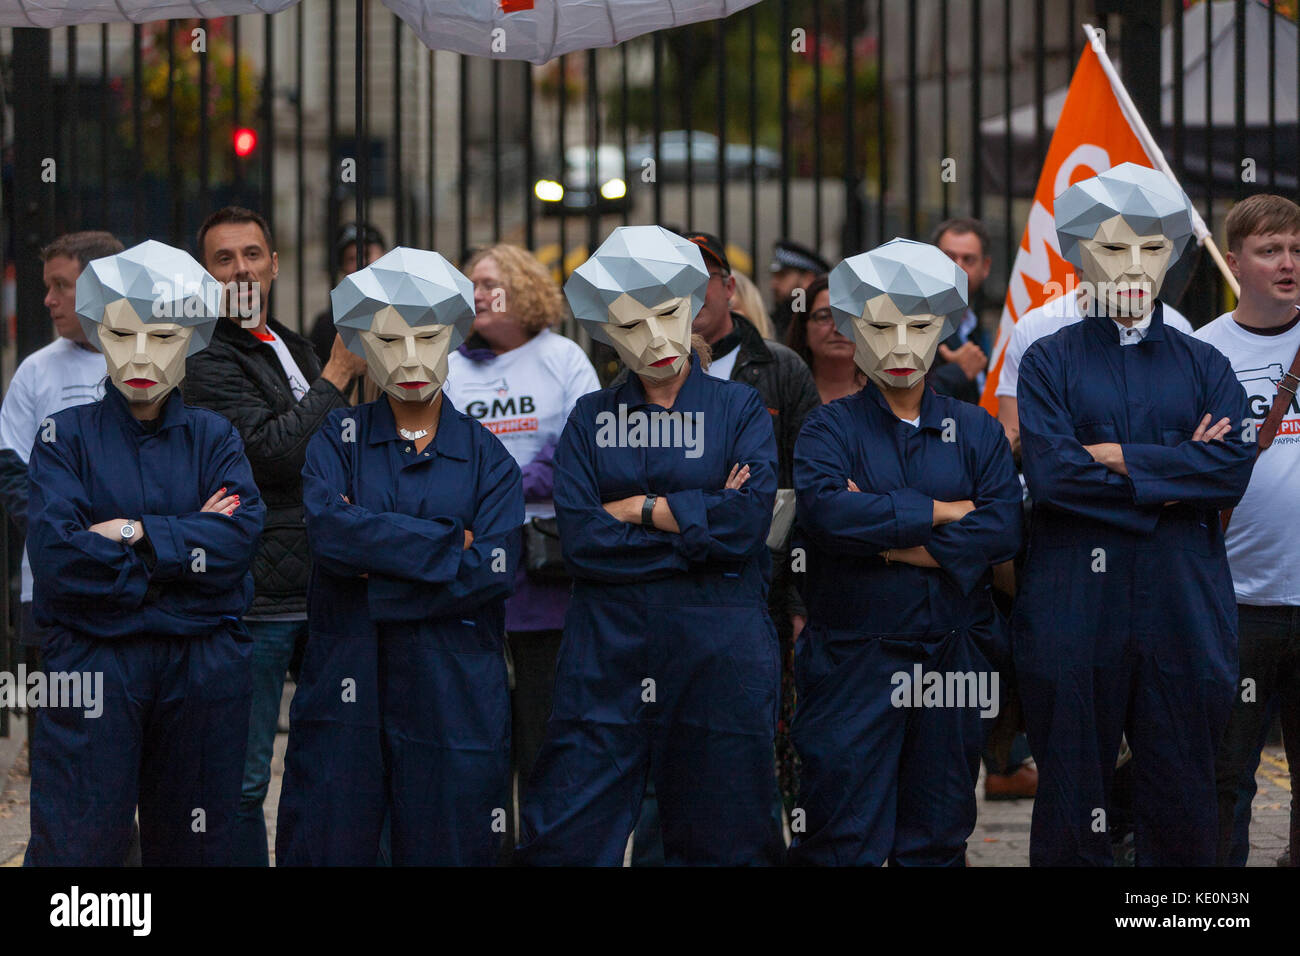 Fair Pay for Public Servants Protest : Whitehall, London UK 17 October, 2017.  The Trades Union Congress (TUC), union members and supporters use 'Maybot' figures in a protest outside Downing Street to demand an end to restrictions on public sector pay and urge the government to act quickly to insure that their members get the pay rise they deserve. Credit: Steve Parkins/Alamy Live News Stock Photo